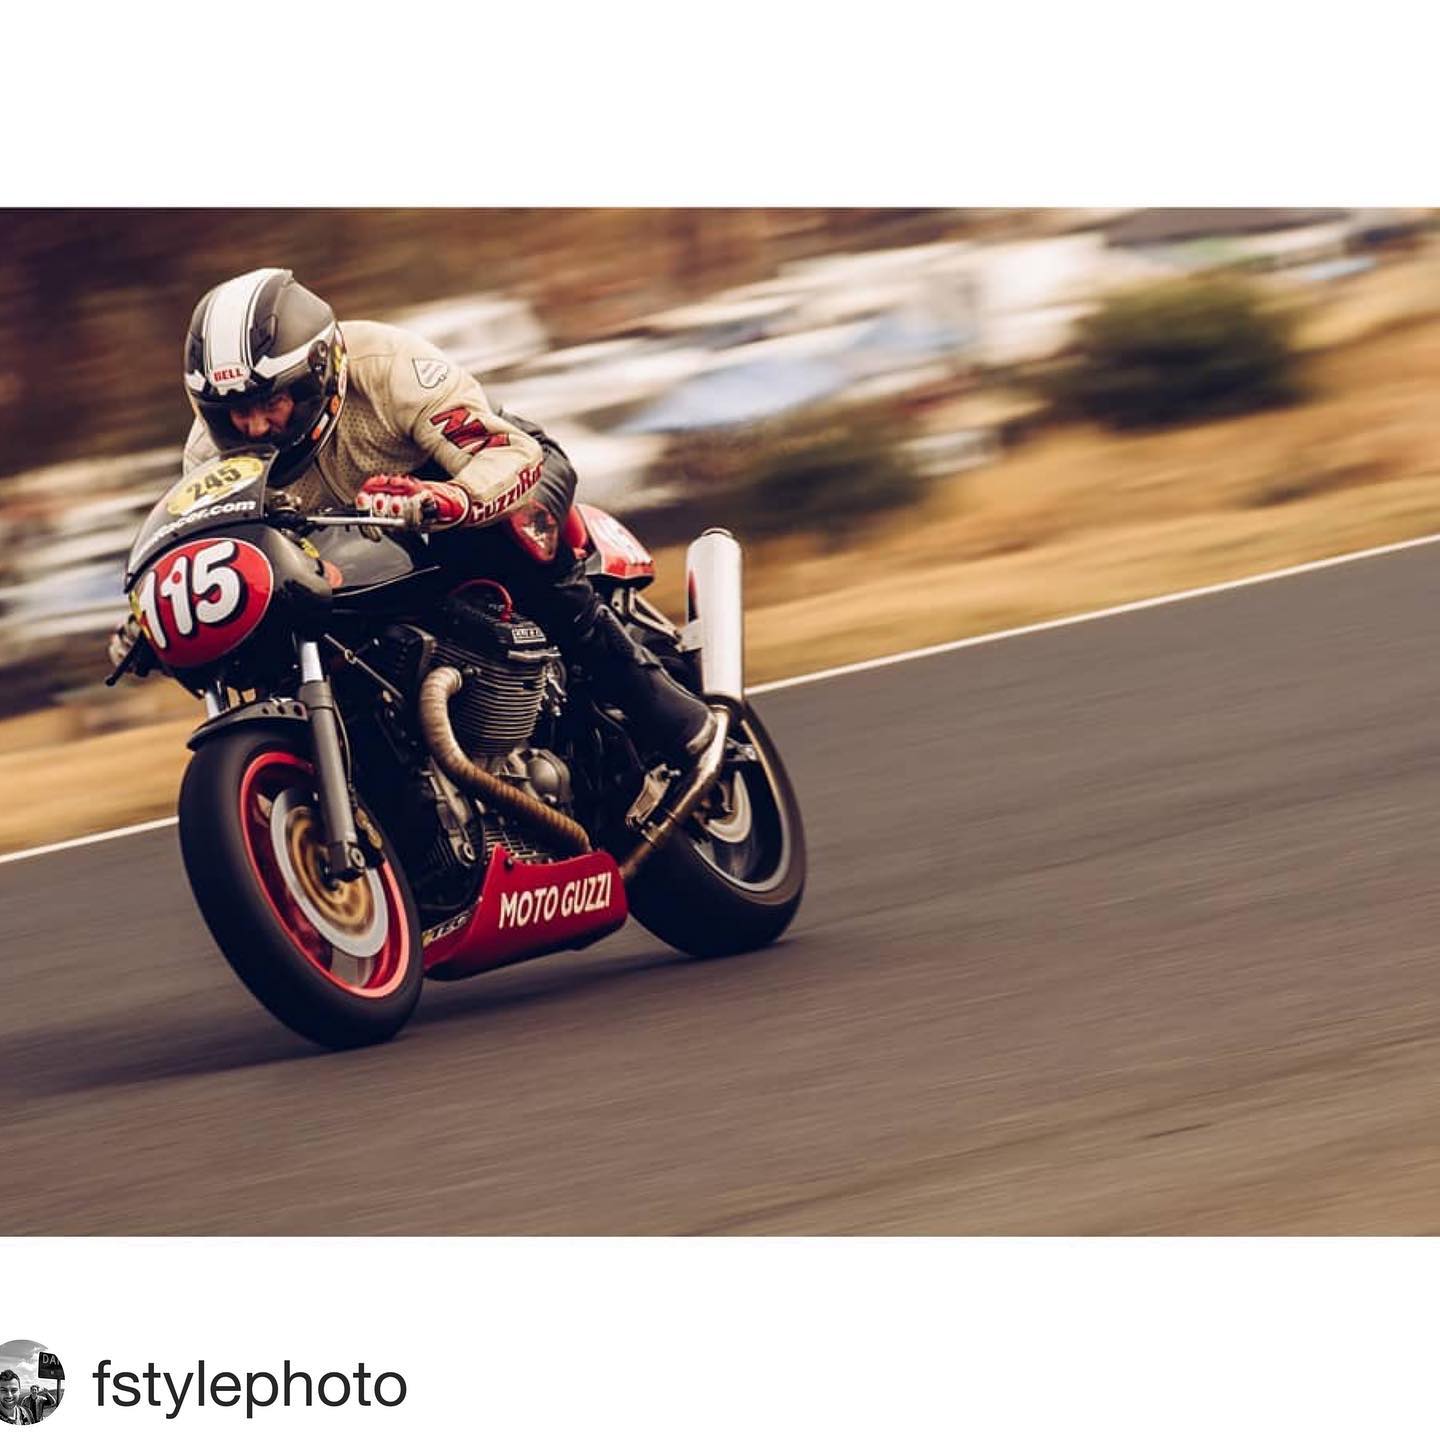 @fstylephoto with @get_repost
・・・
The road racing track at the Broadford Bike Bonanza was graced with some beautiful machinery such as this Moto Guzzi. After riding this track countless times I've never actually ventured around it as a spectator so it was great to head over to crash corner and snap a few shots of these classics about to start their braking for this notorious corner. #